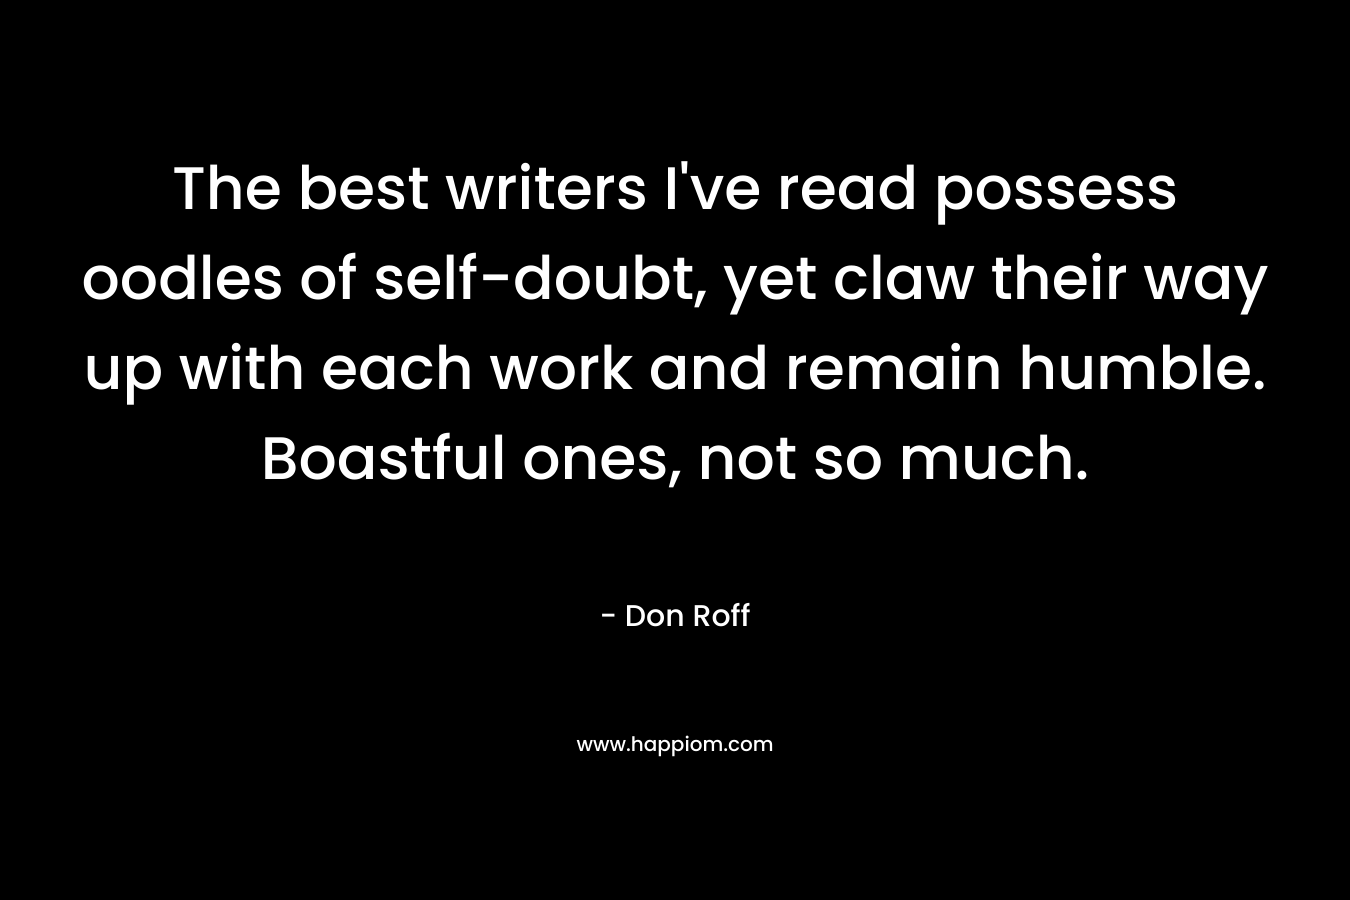 The best writers I've read possess oodles of self-doubt, yet claw their way up with each work and remain humble. Boastful ones, not so much.